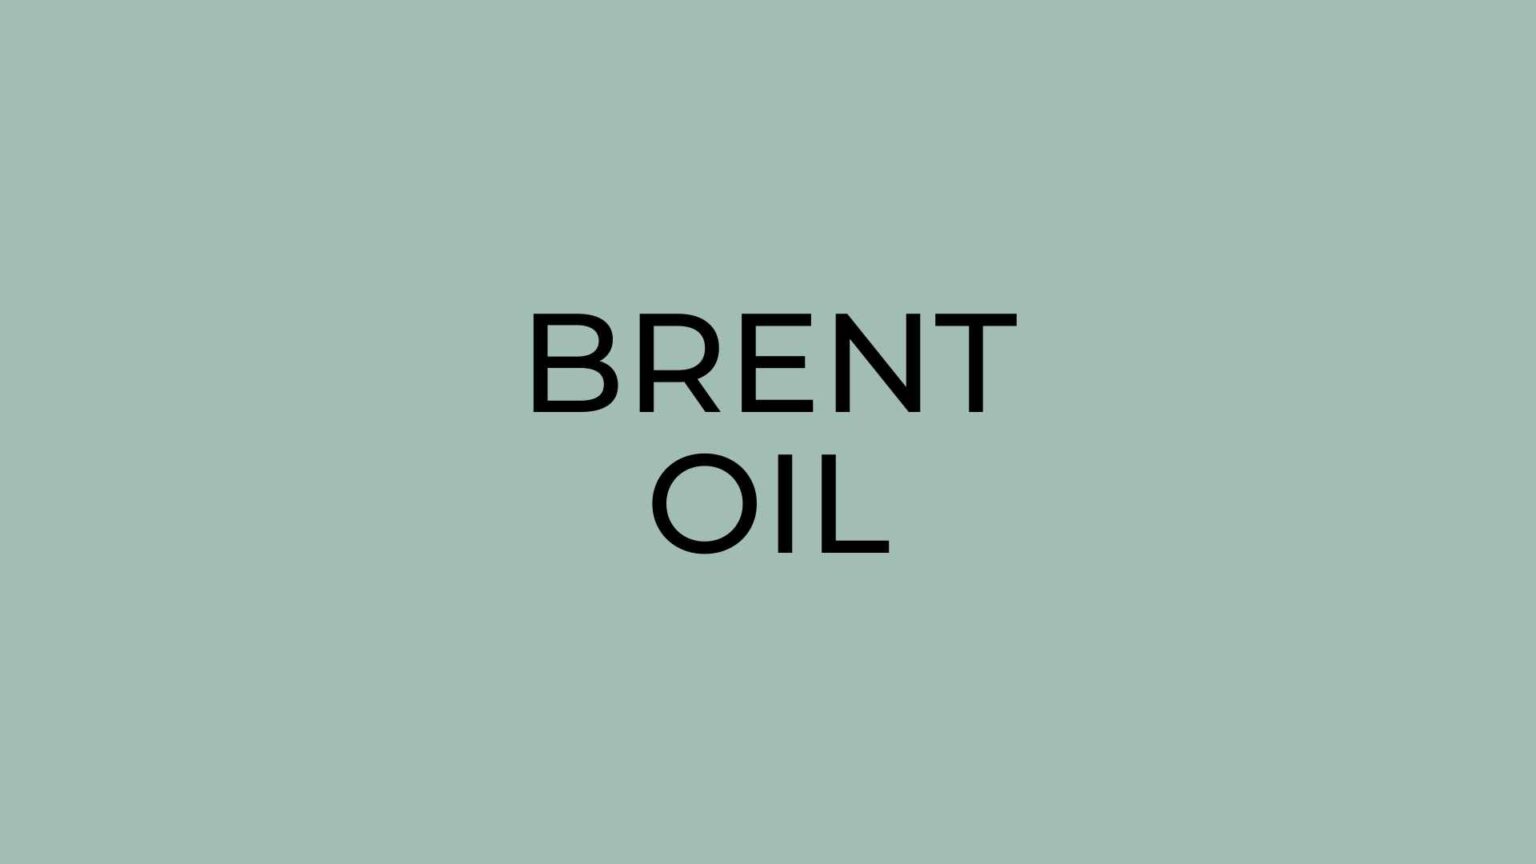 Brent crude oil price today .14-0.09 (-0.12%) – 2 July 21